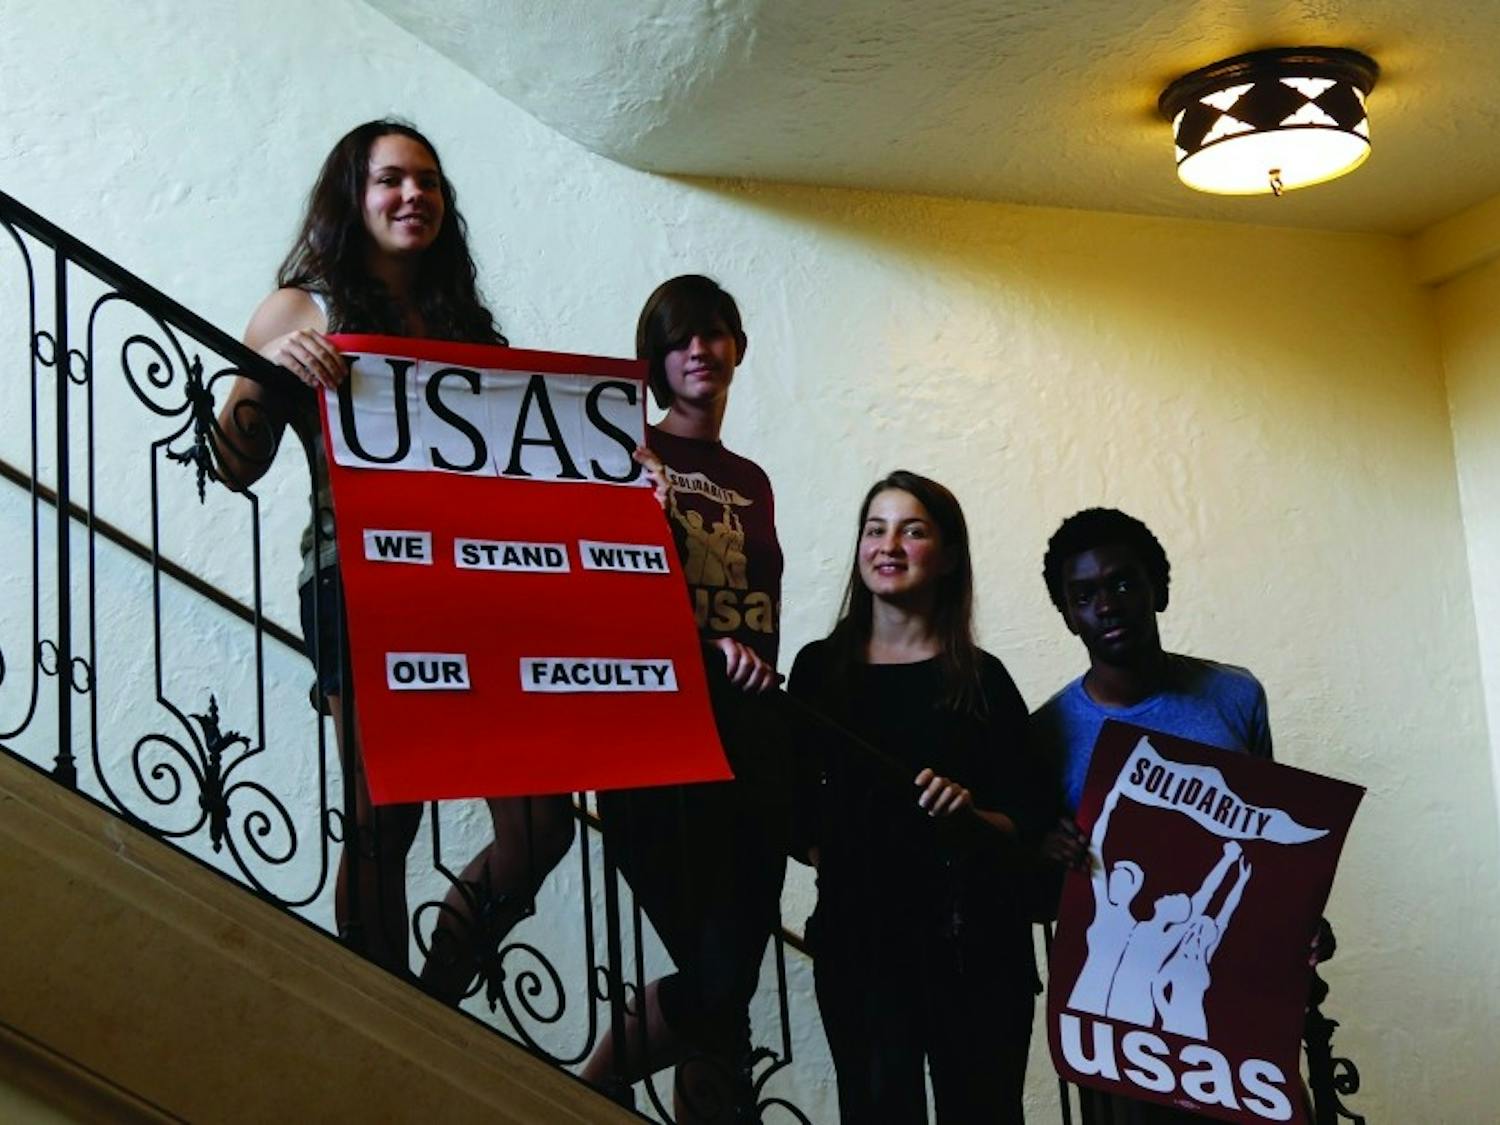 Members of the United Students against Sweatshops organization petitioned administrators earlier in the year to raise awareness as faculty members try to gain better working conditions and wages.&nbsp;&nbsp;